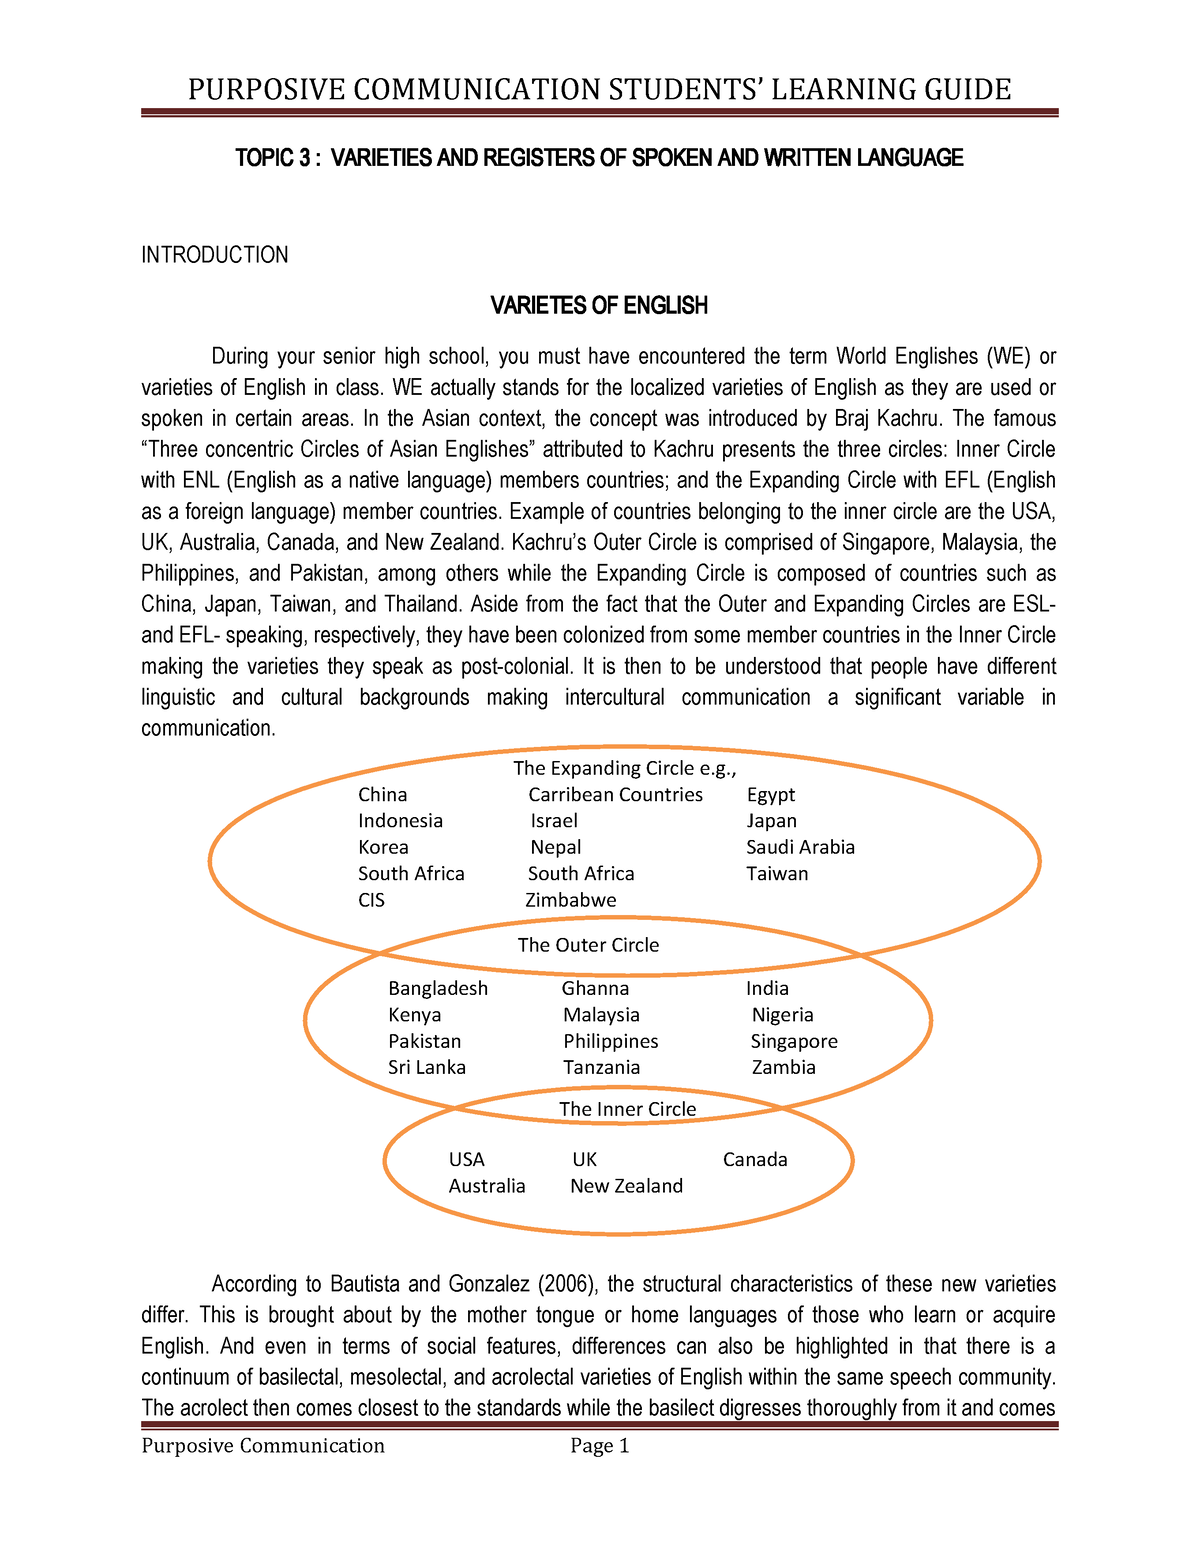 varieties and registers of spoken and written language essay